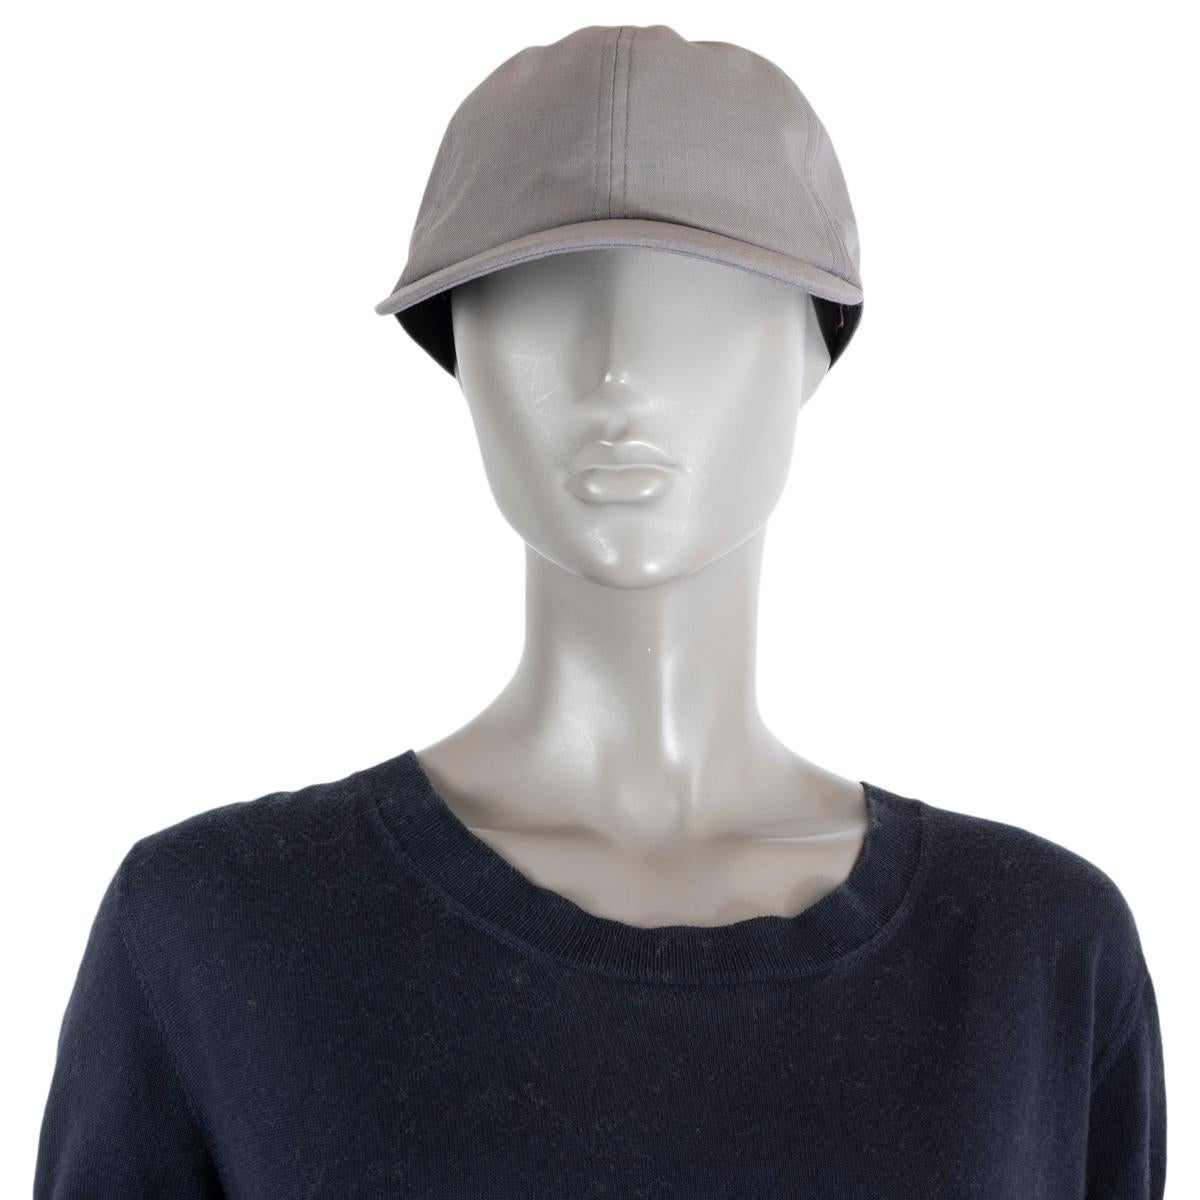 100% authentic Sacai drawstring baseball cap in grey wool (100%).  Has been worn and is in virtually new condition.

Measurements
Tag Size	2
Inside Circumference	56cm (21.8in)

All our listings include only the listed item unless otherwise specified